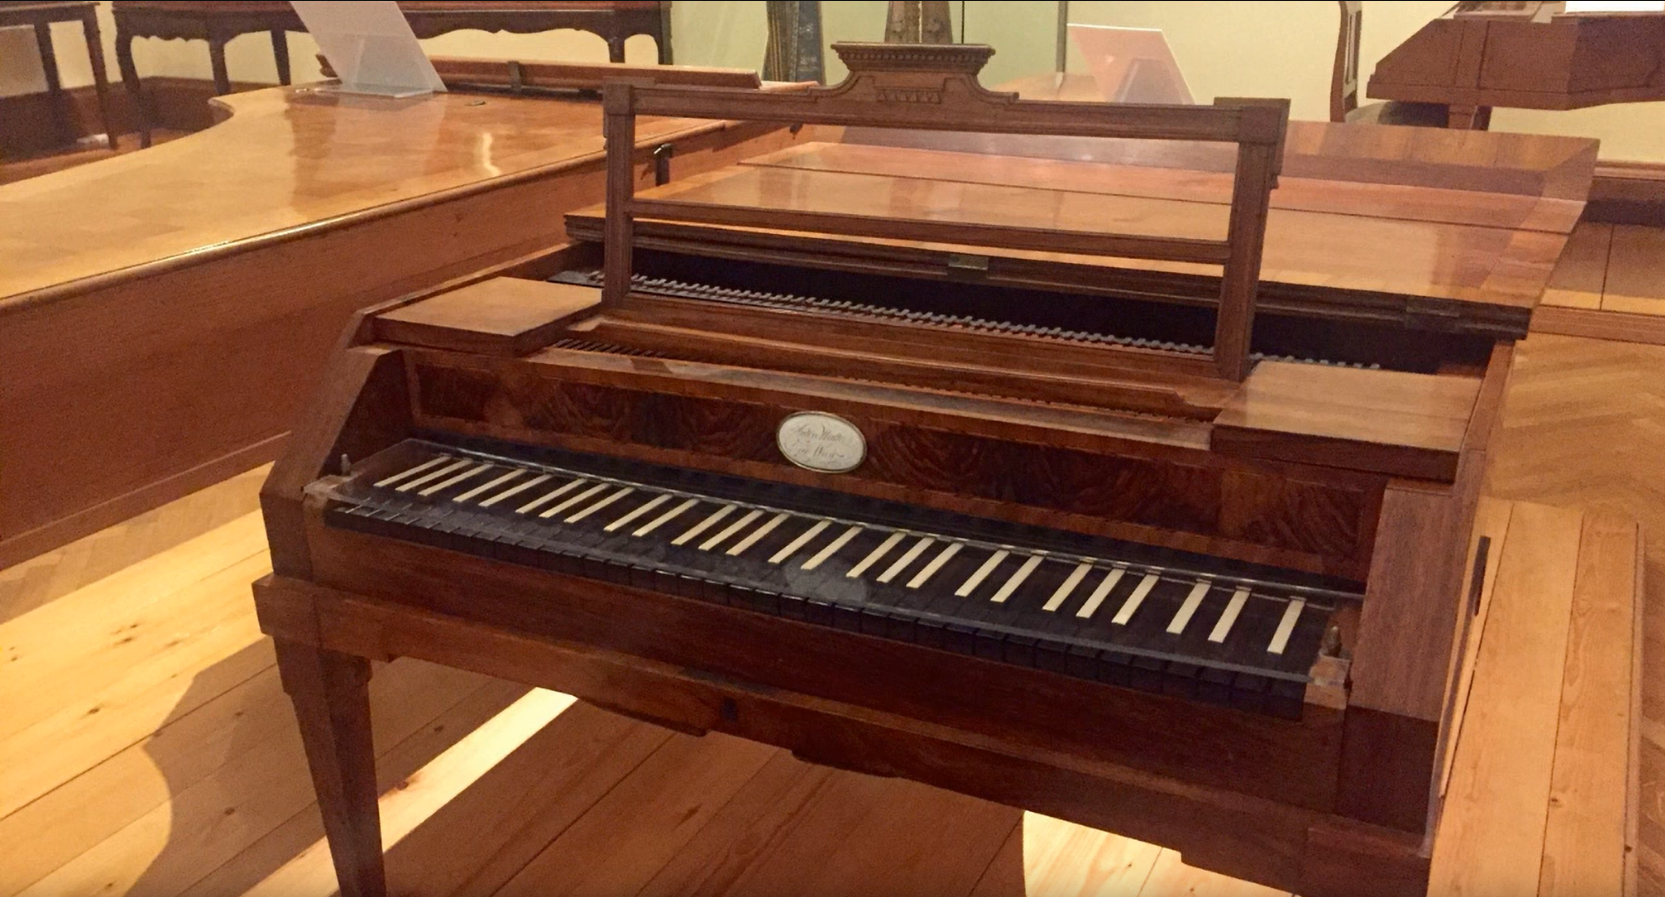 a fortepiano sits on a wood floor surrounded by other kinds of pianos